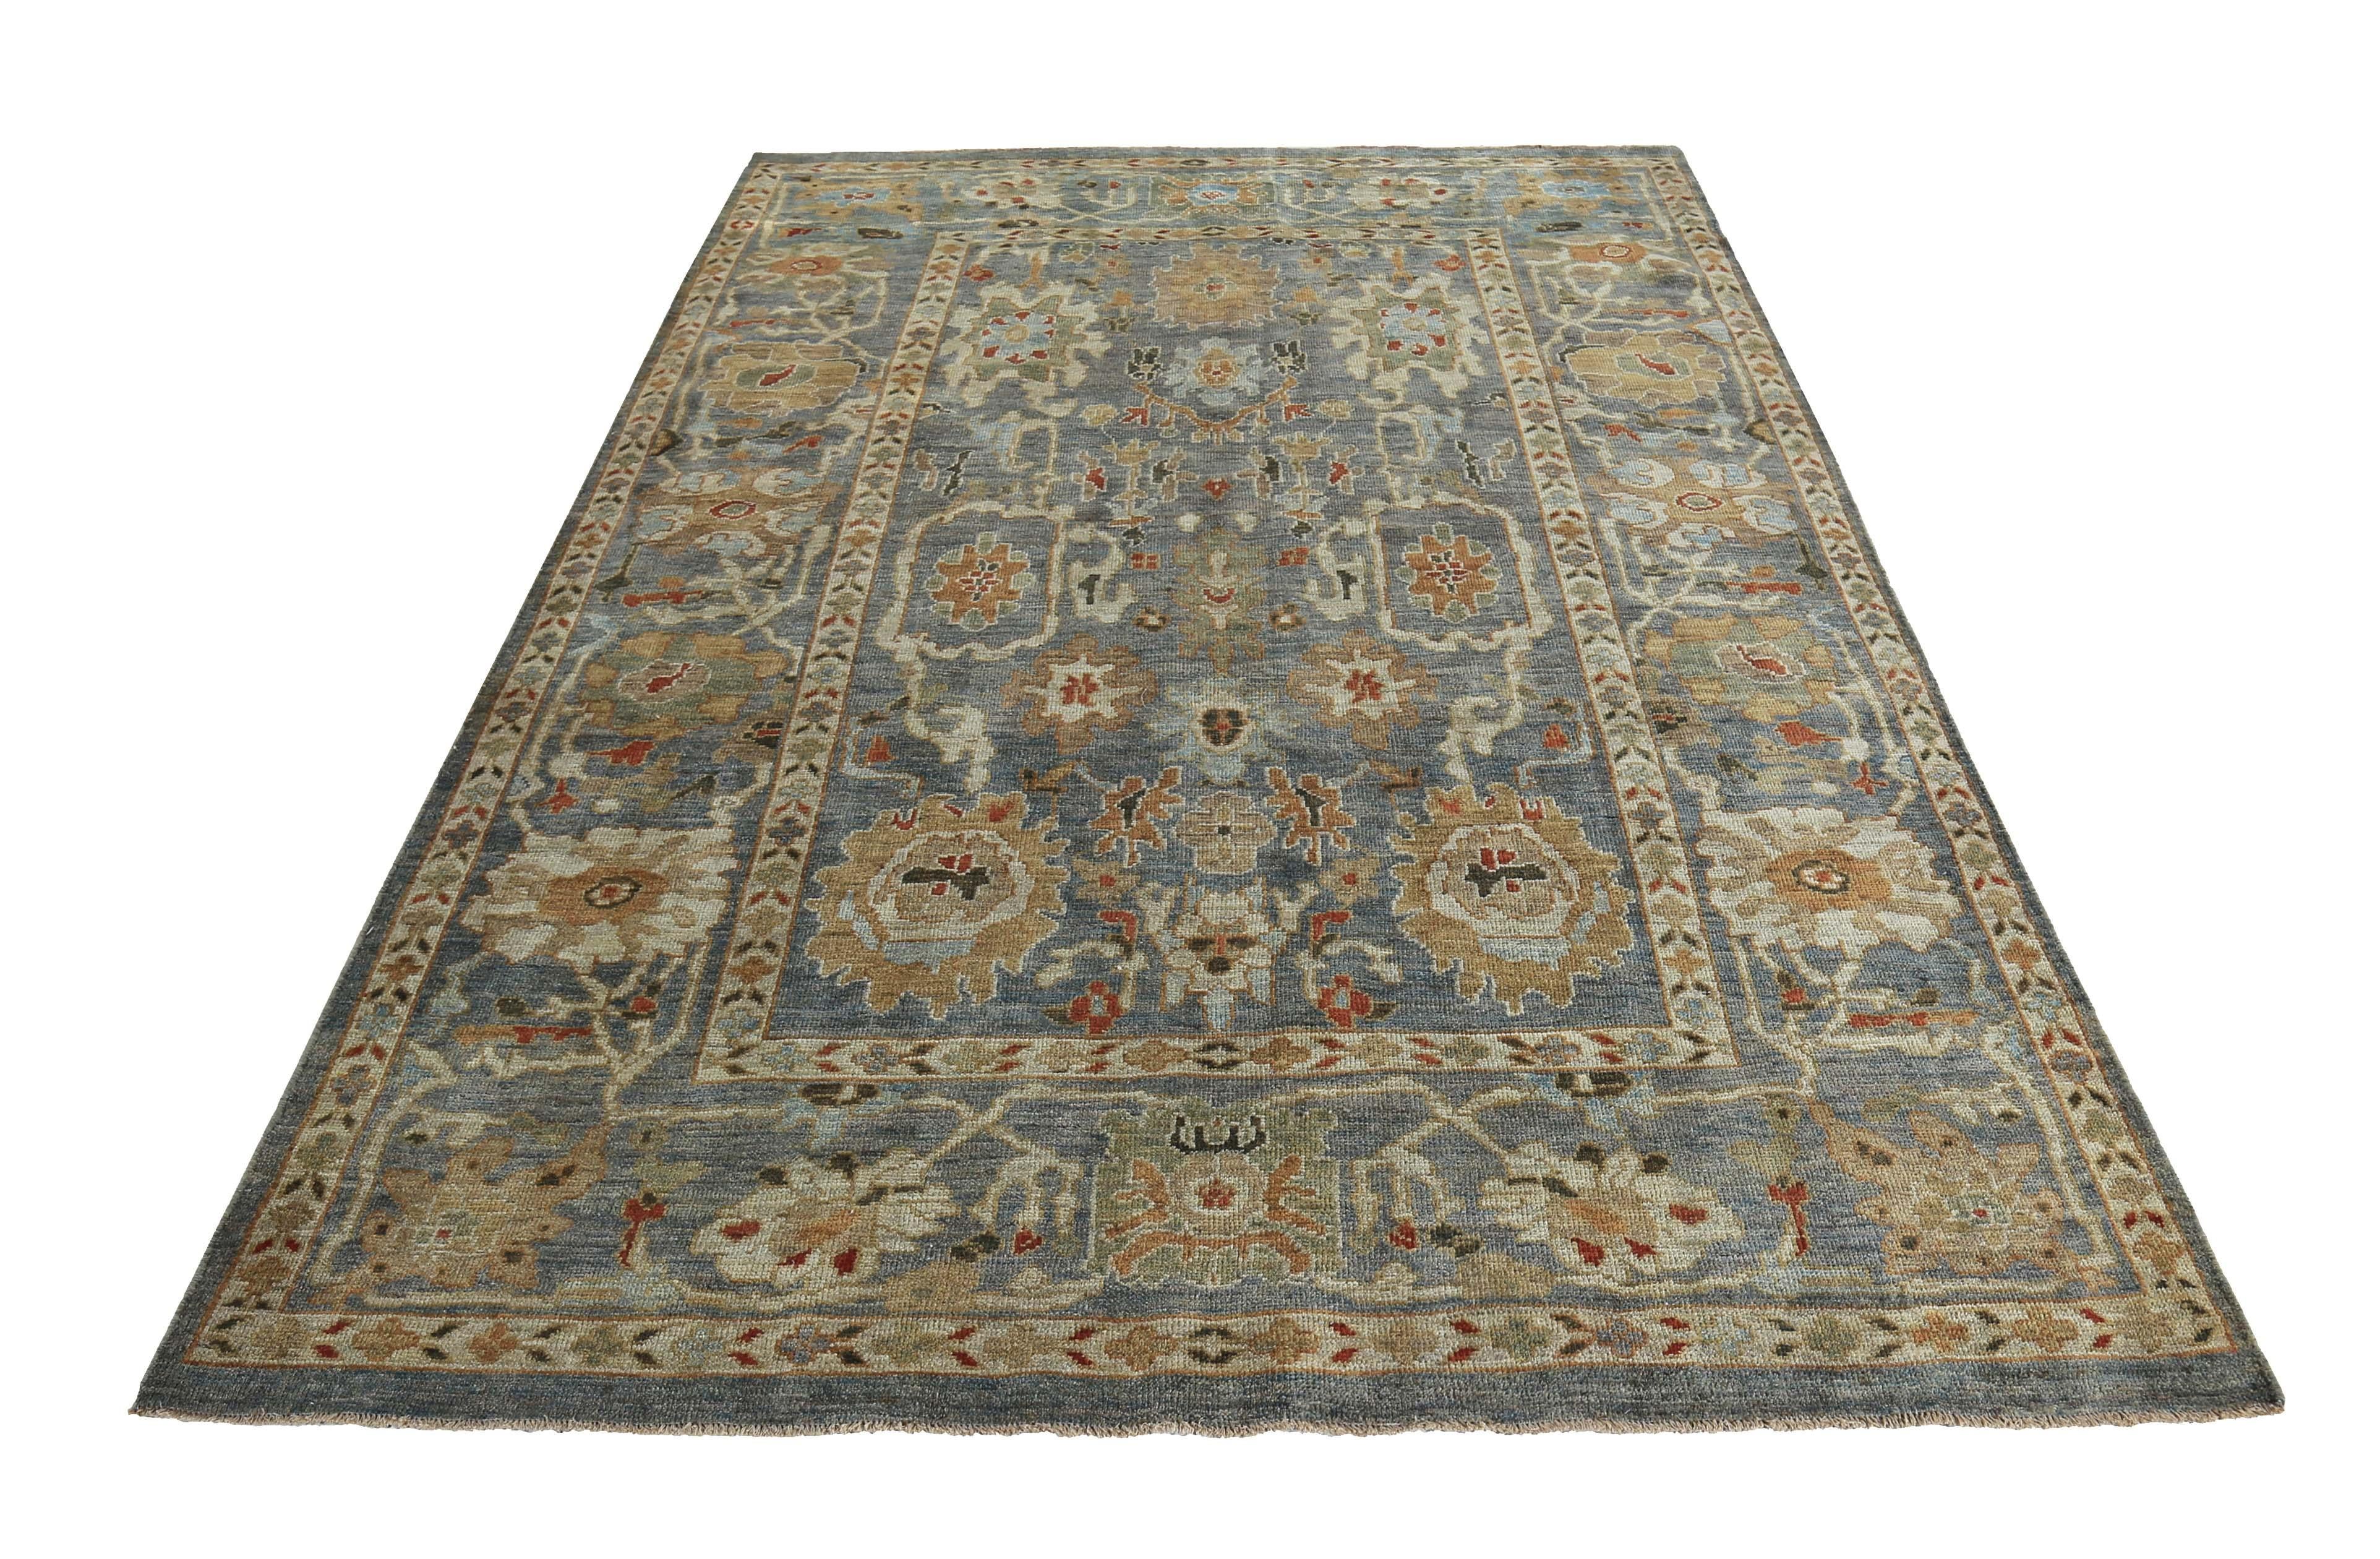 New handmade Turkish rug from high quality sheep’s wool and colored with eco-friendly vegetable dyes that are proven safe for humans and pets alike. It’s a Classic Sultanabad design showcasing a lovely gray field with prominent Herati flower heads